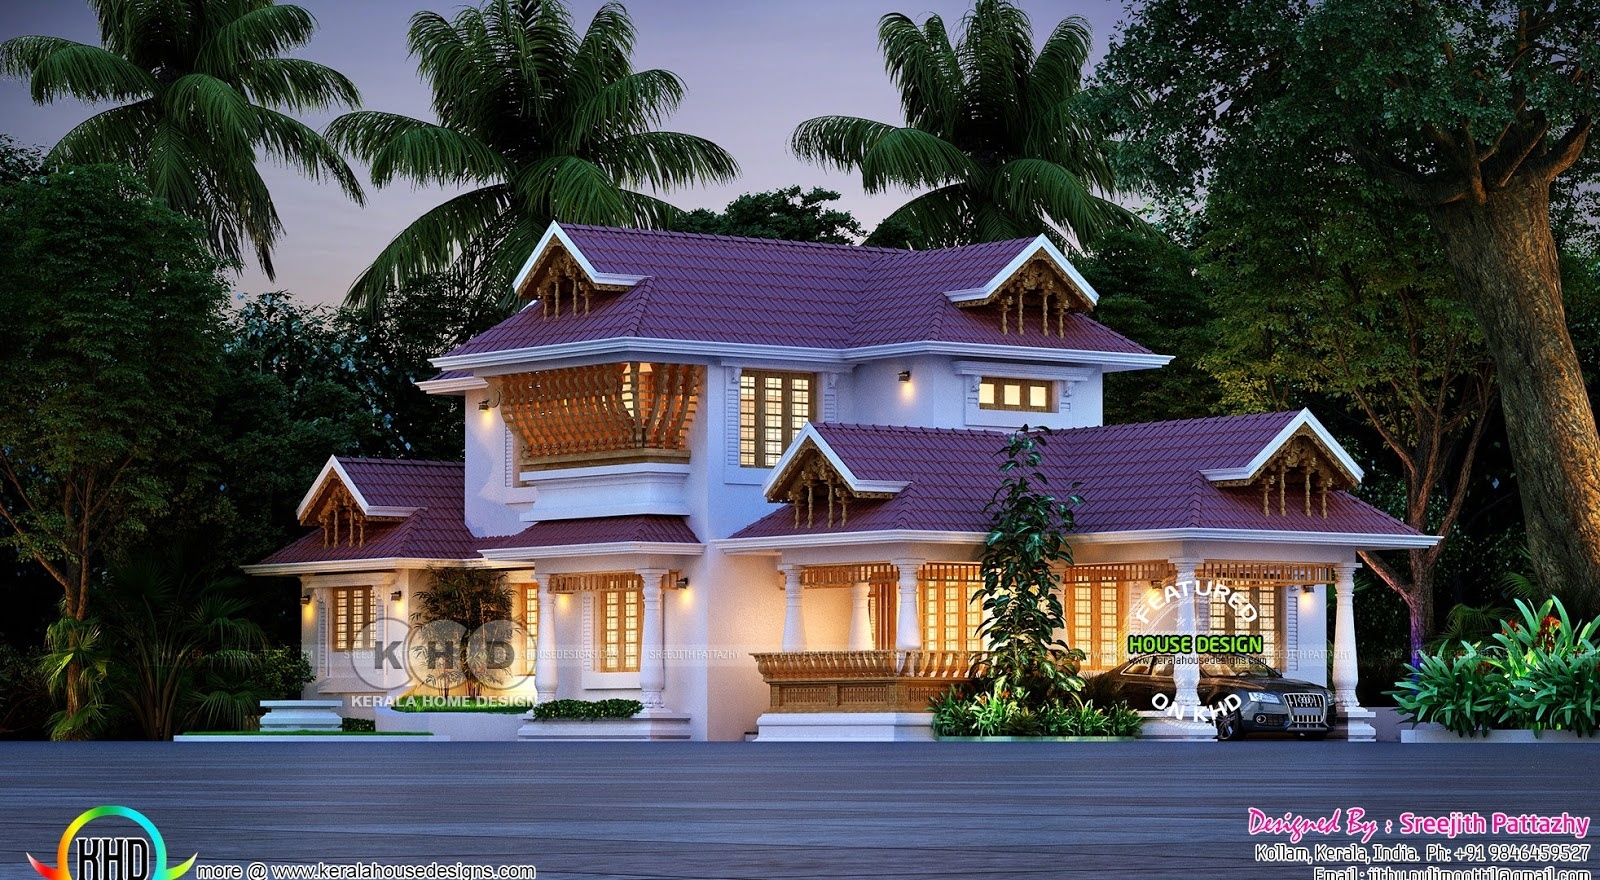 Image of 2230 sq ft 4 bhk kerala traditional home kerala home design and floor within astonishing kerala houses design